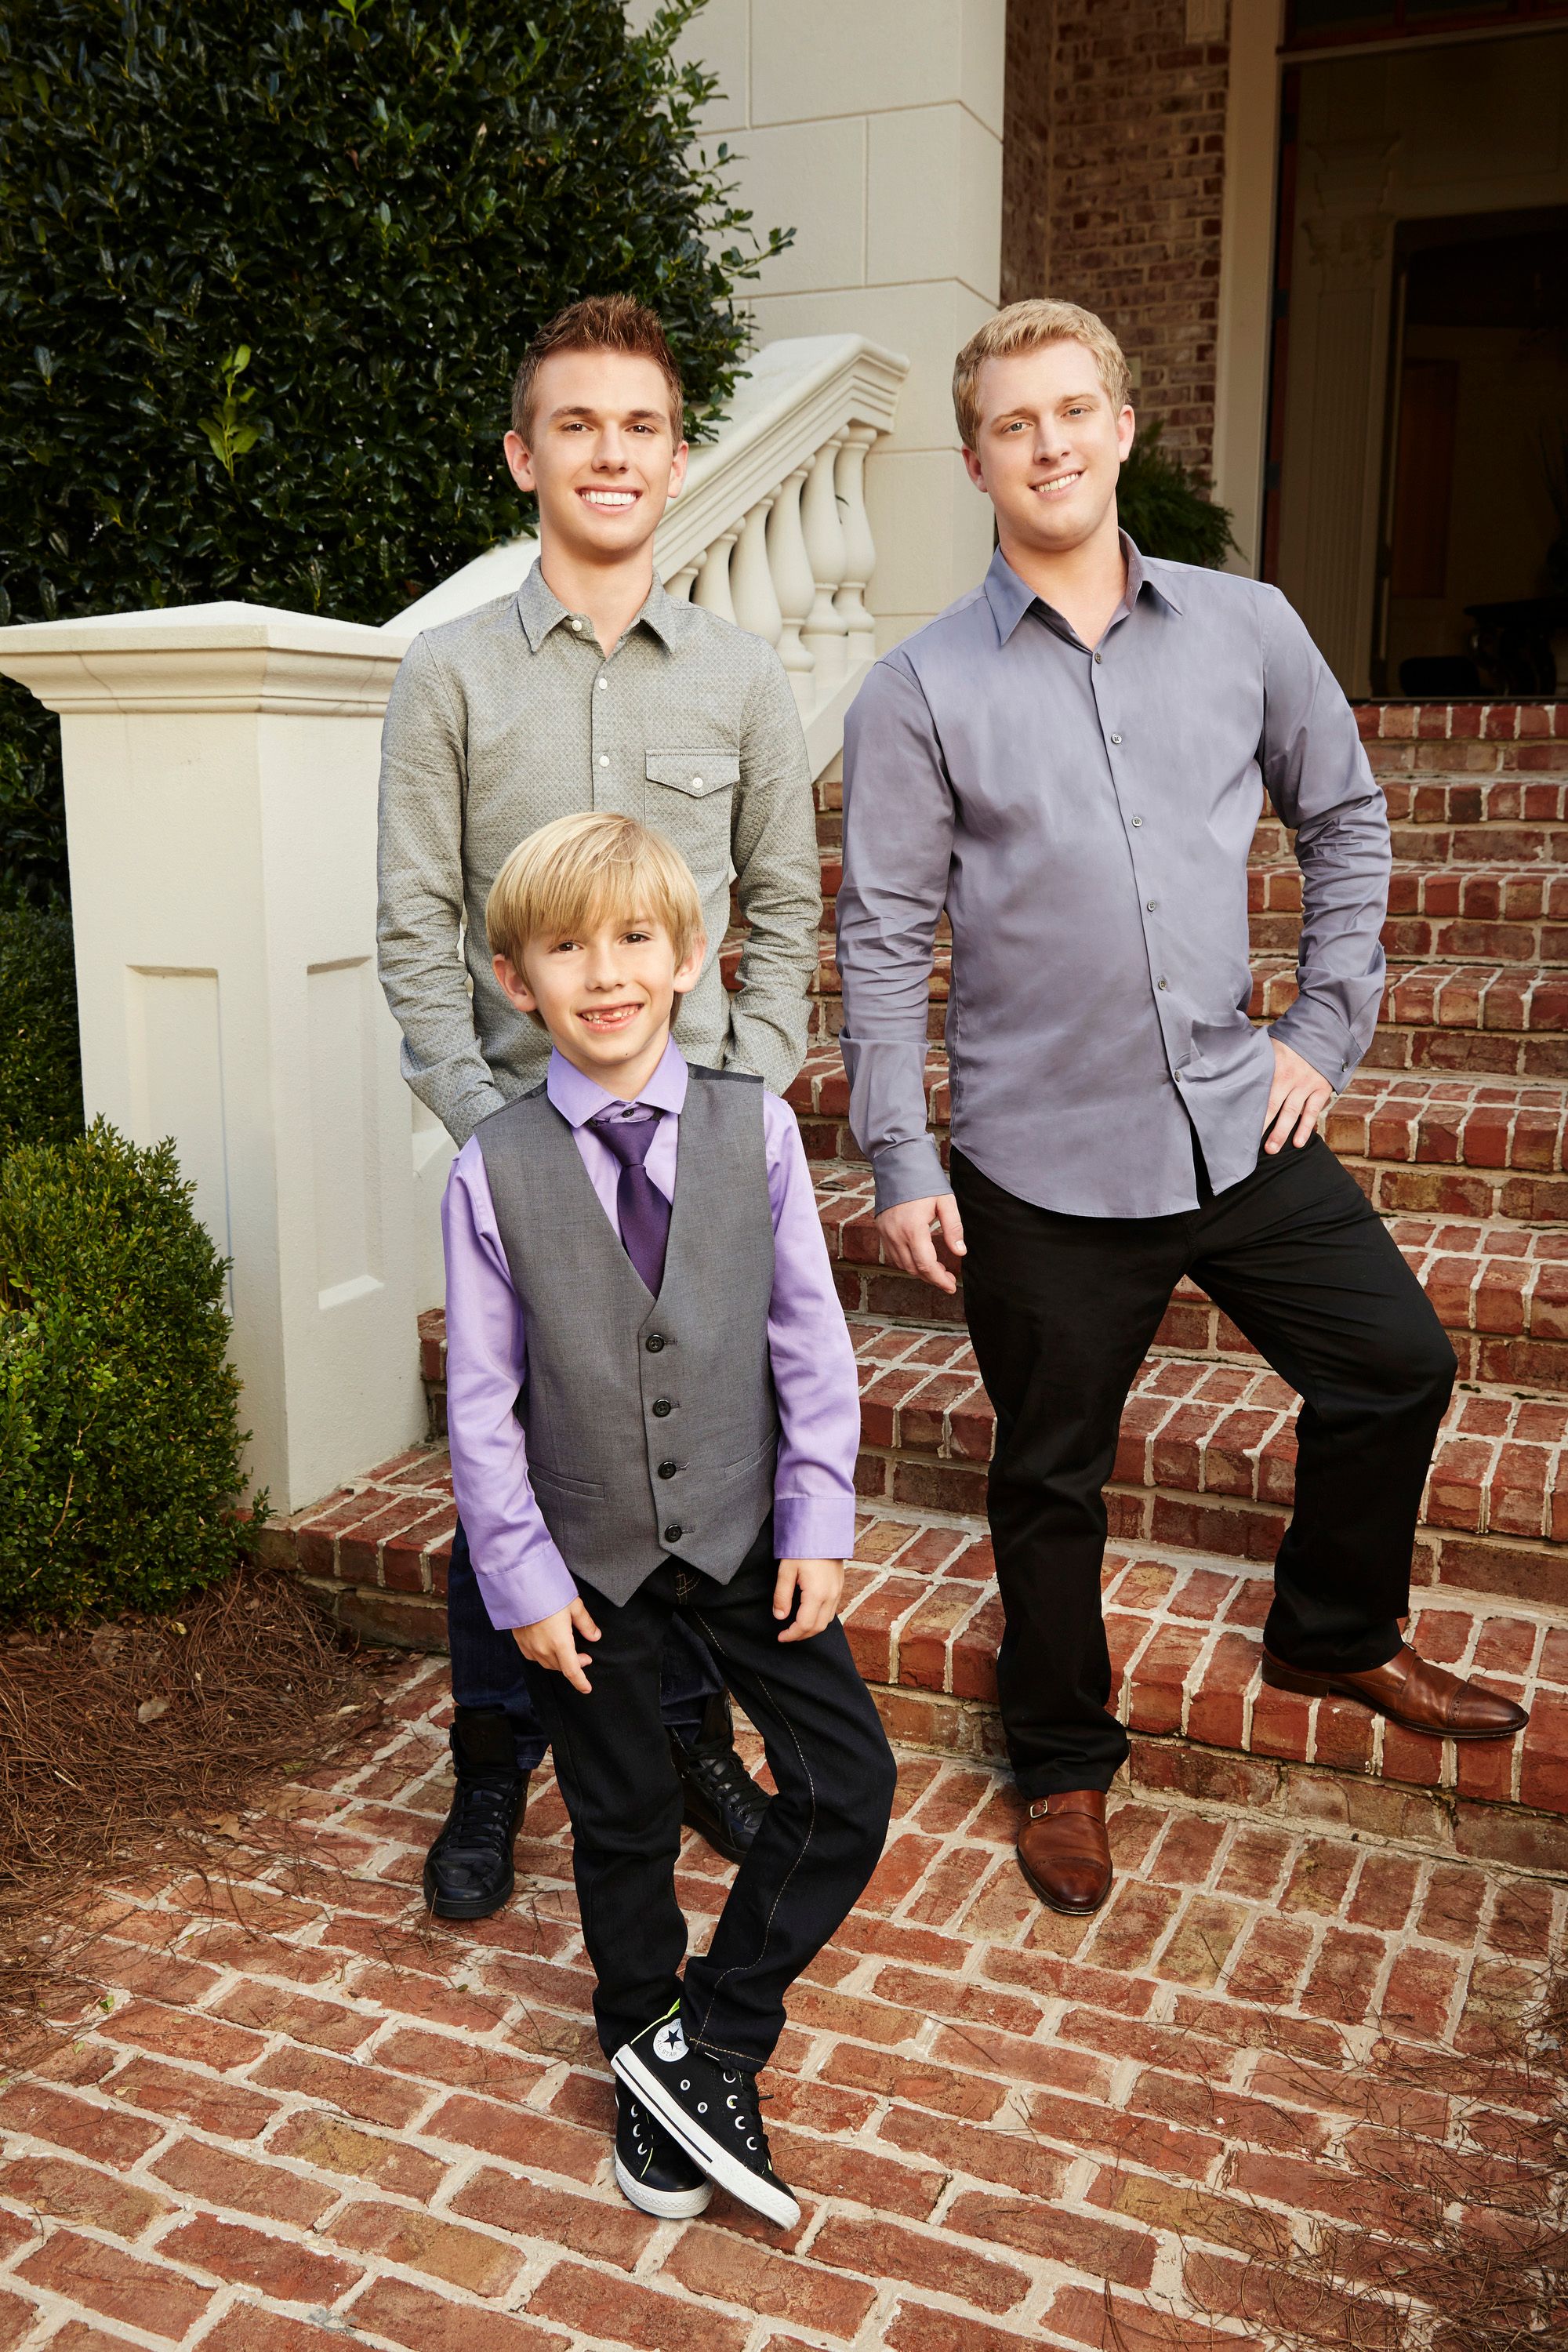 Grayson, Chase, and Kyle Chrisley on season 1 of "Chrisley Knows Best" on October 02, 2013 | Photo: Getty Images